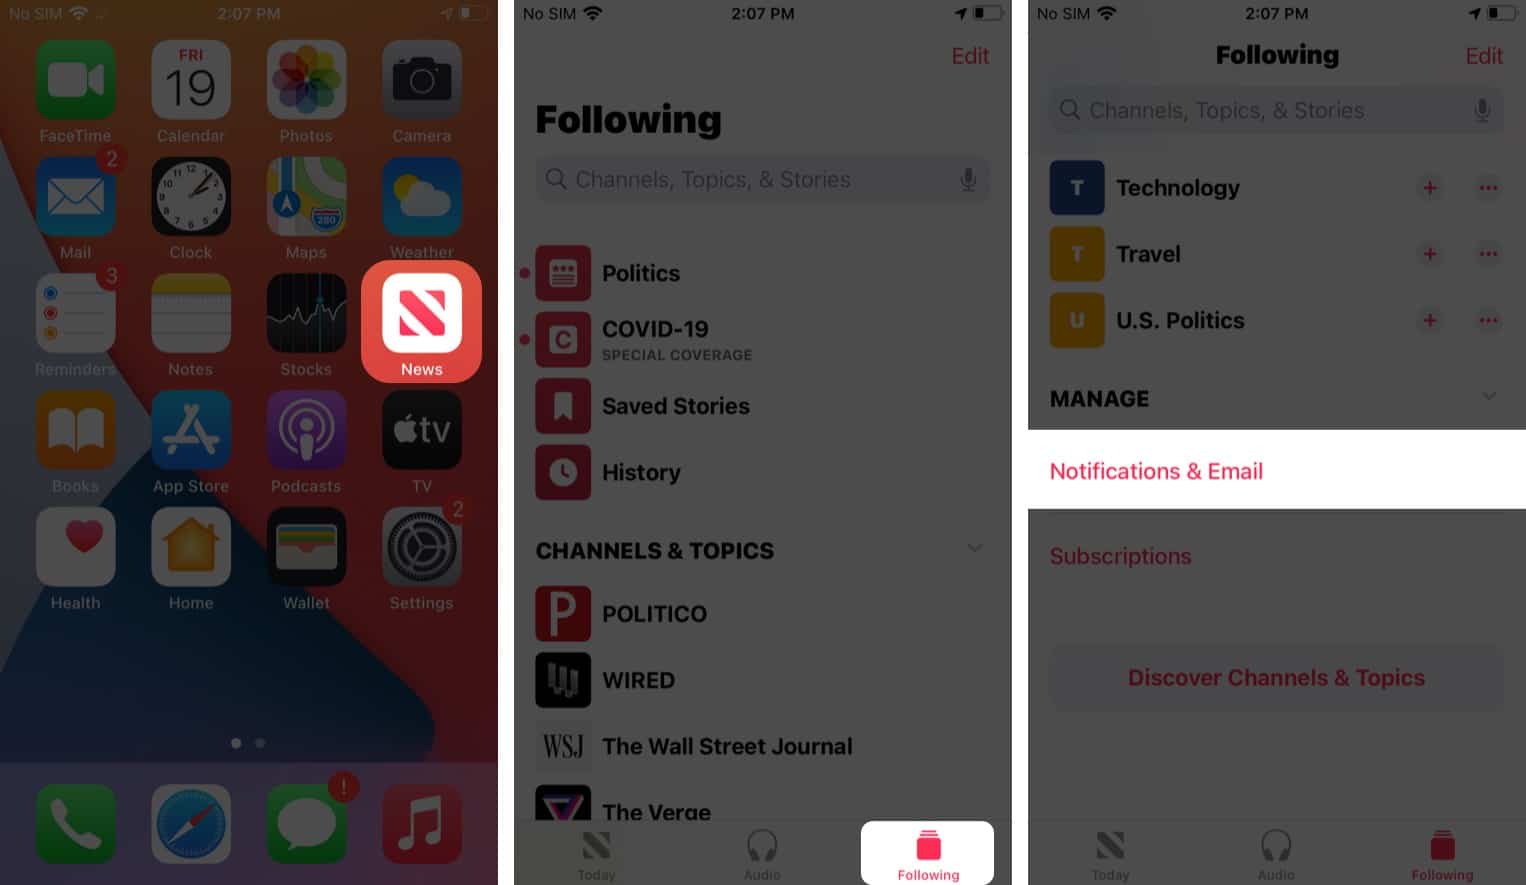 Open News app and tap Notifications and Email on iPhone